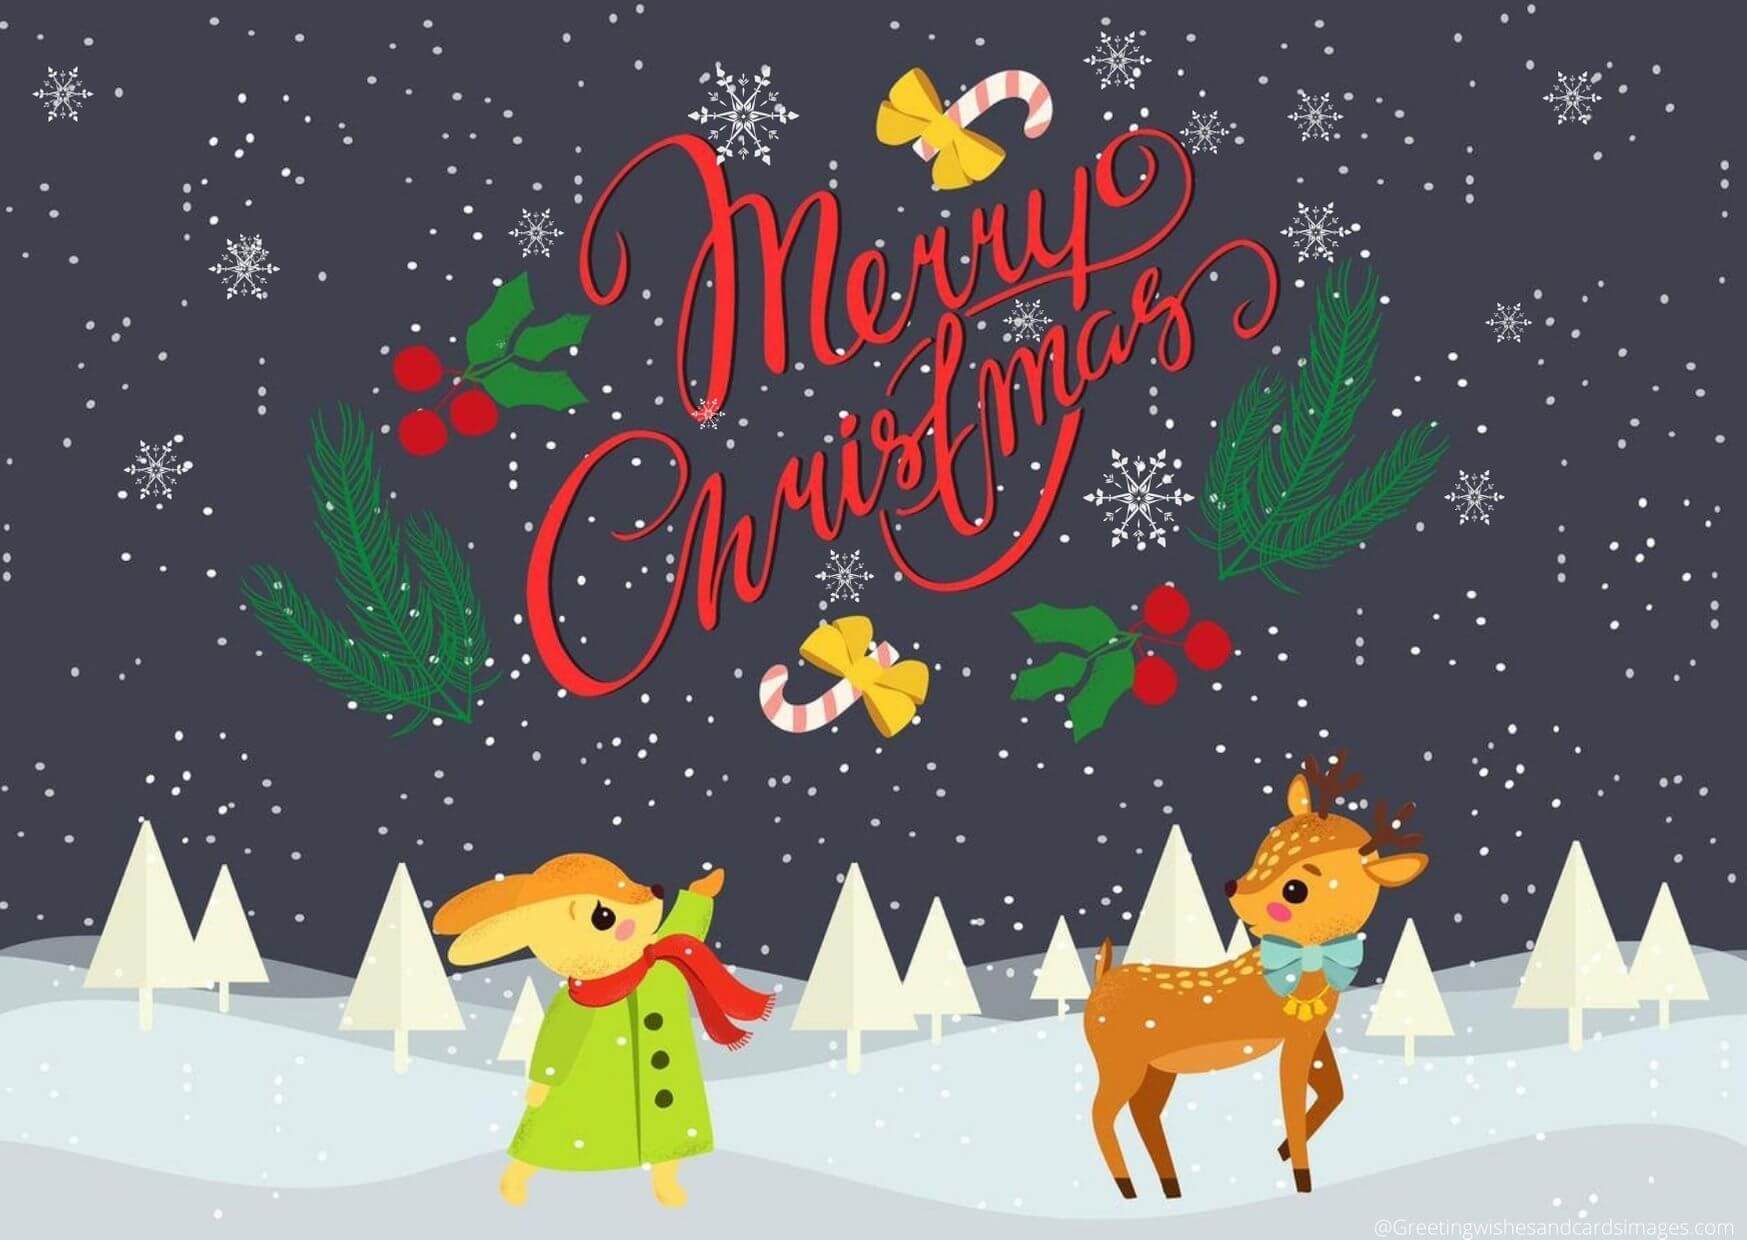 Best Merry Christmas Greetings 2020 - Greeting Wishes And Cards Images